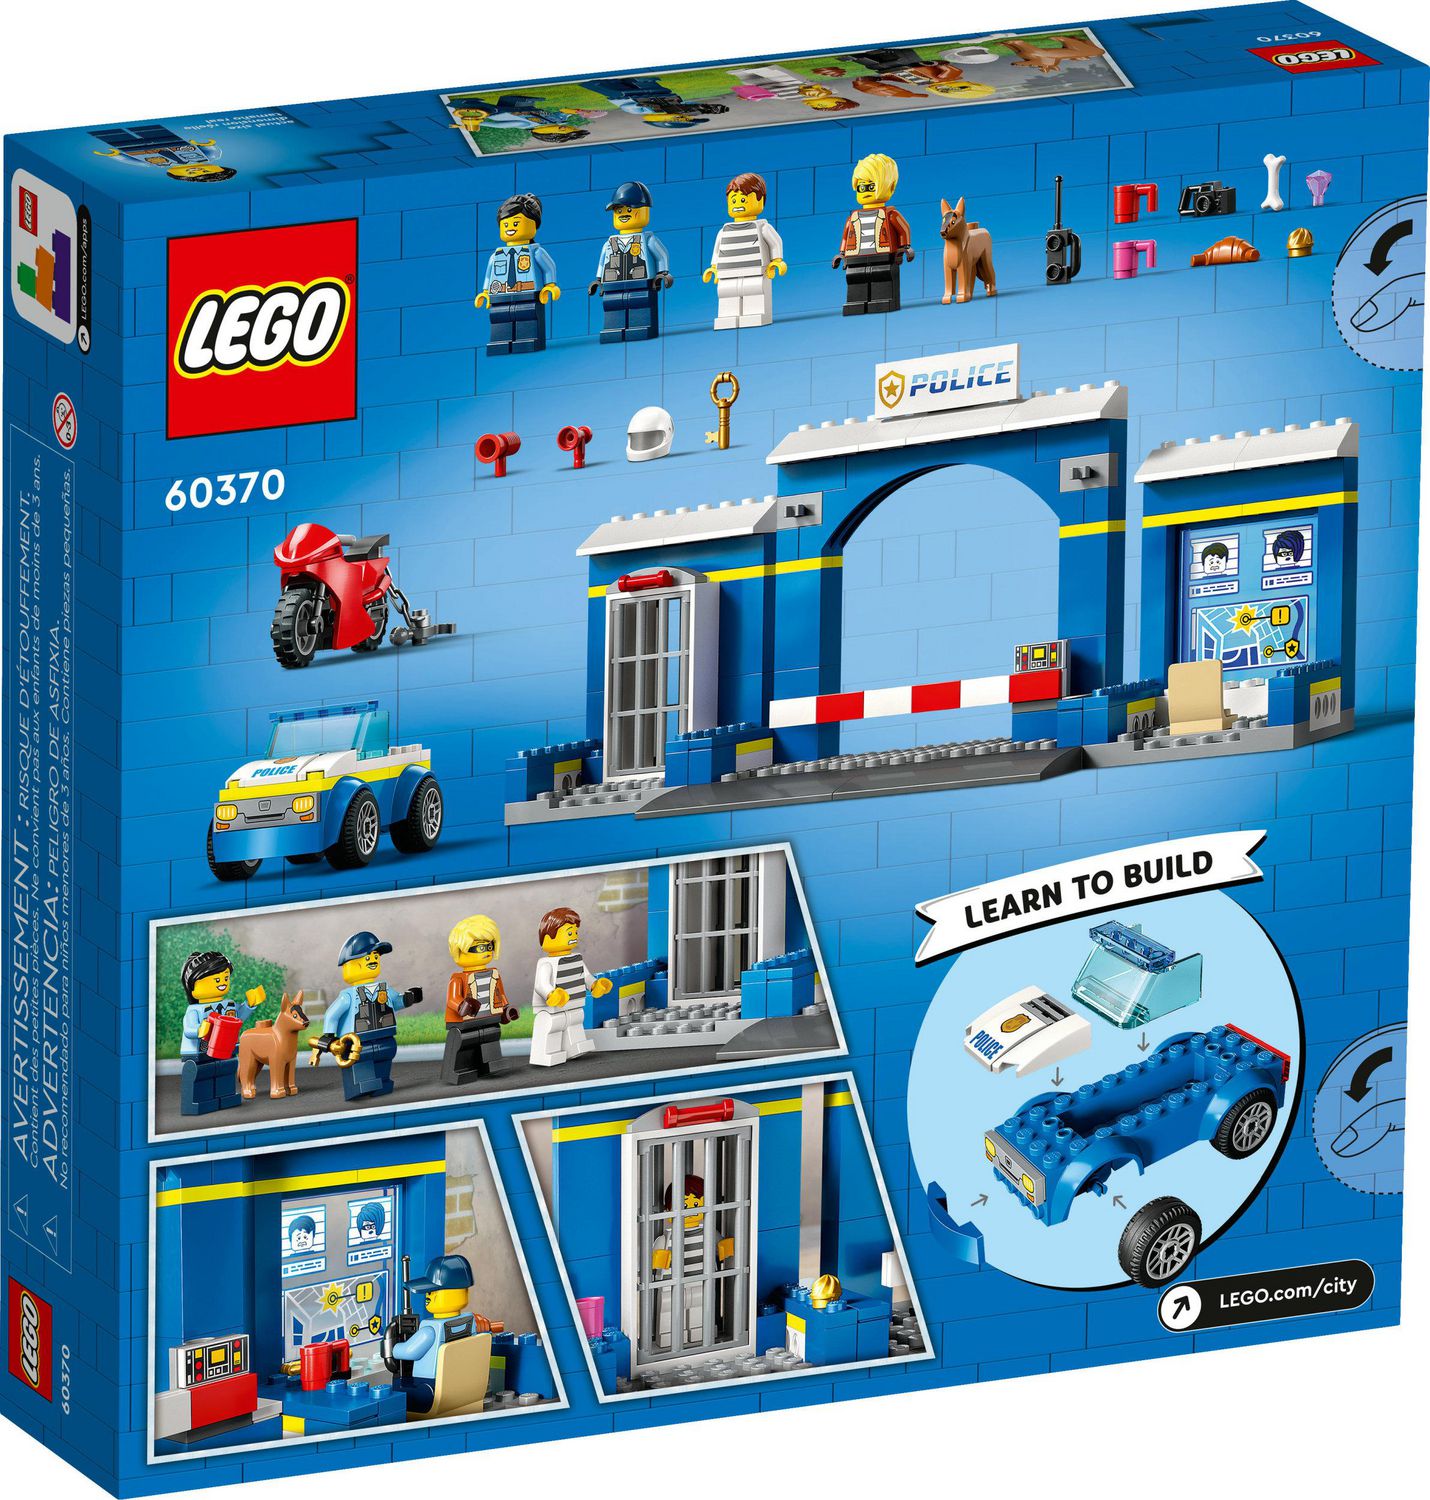 LEGO City Police Station Chase Set with Police Car Toy 60370, Includes 172  Pieces, Ages 4+